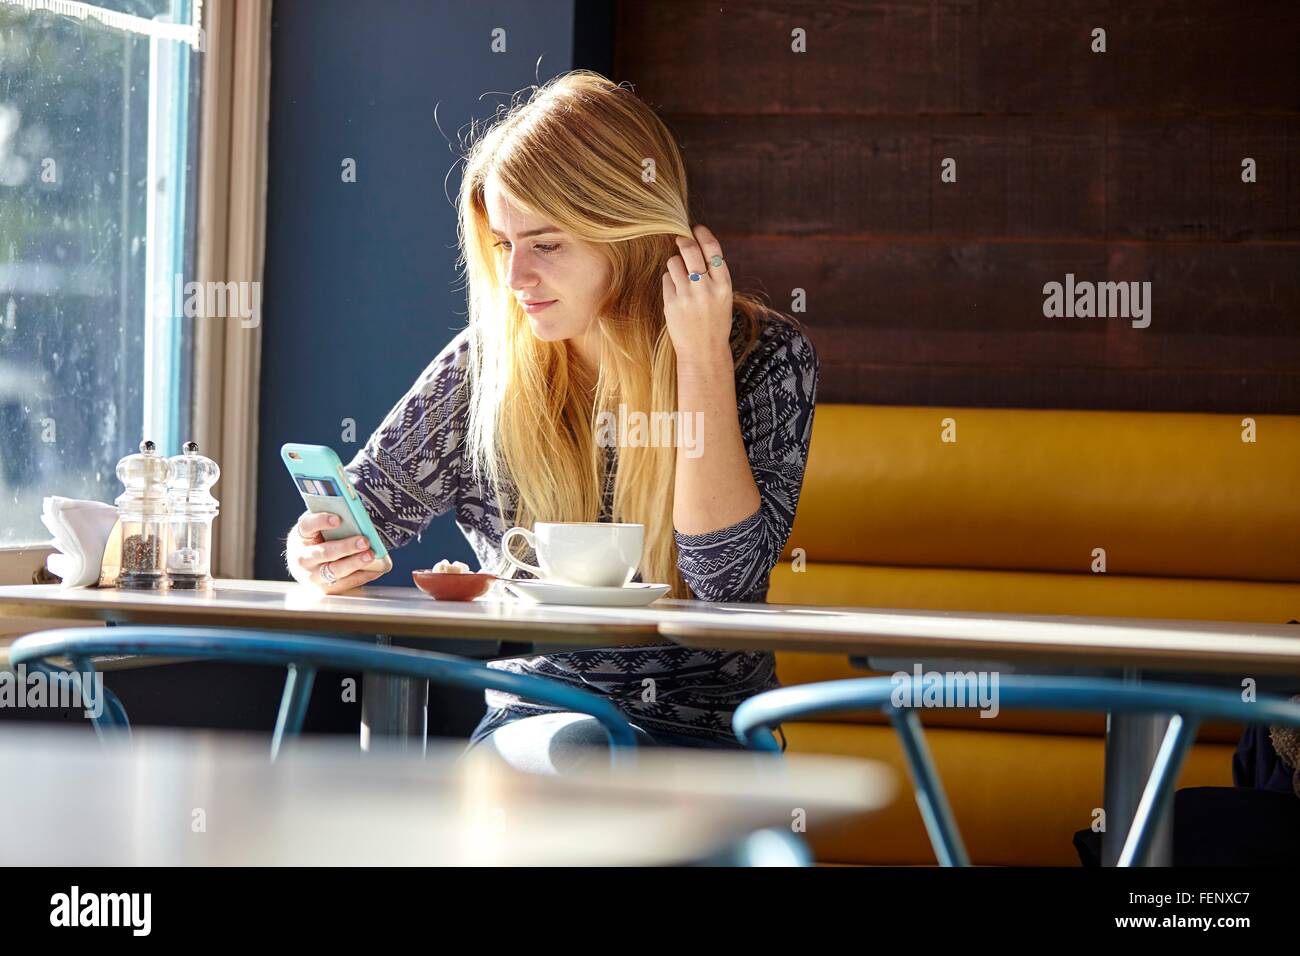 Young woman alone in cafe reading smartphone texts Stock Photo